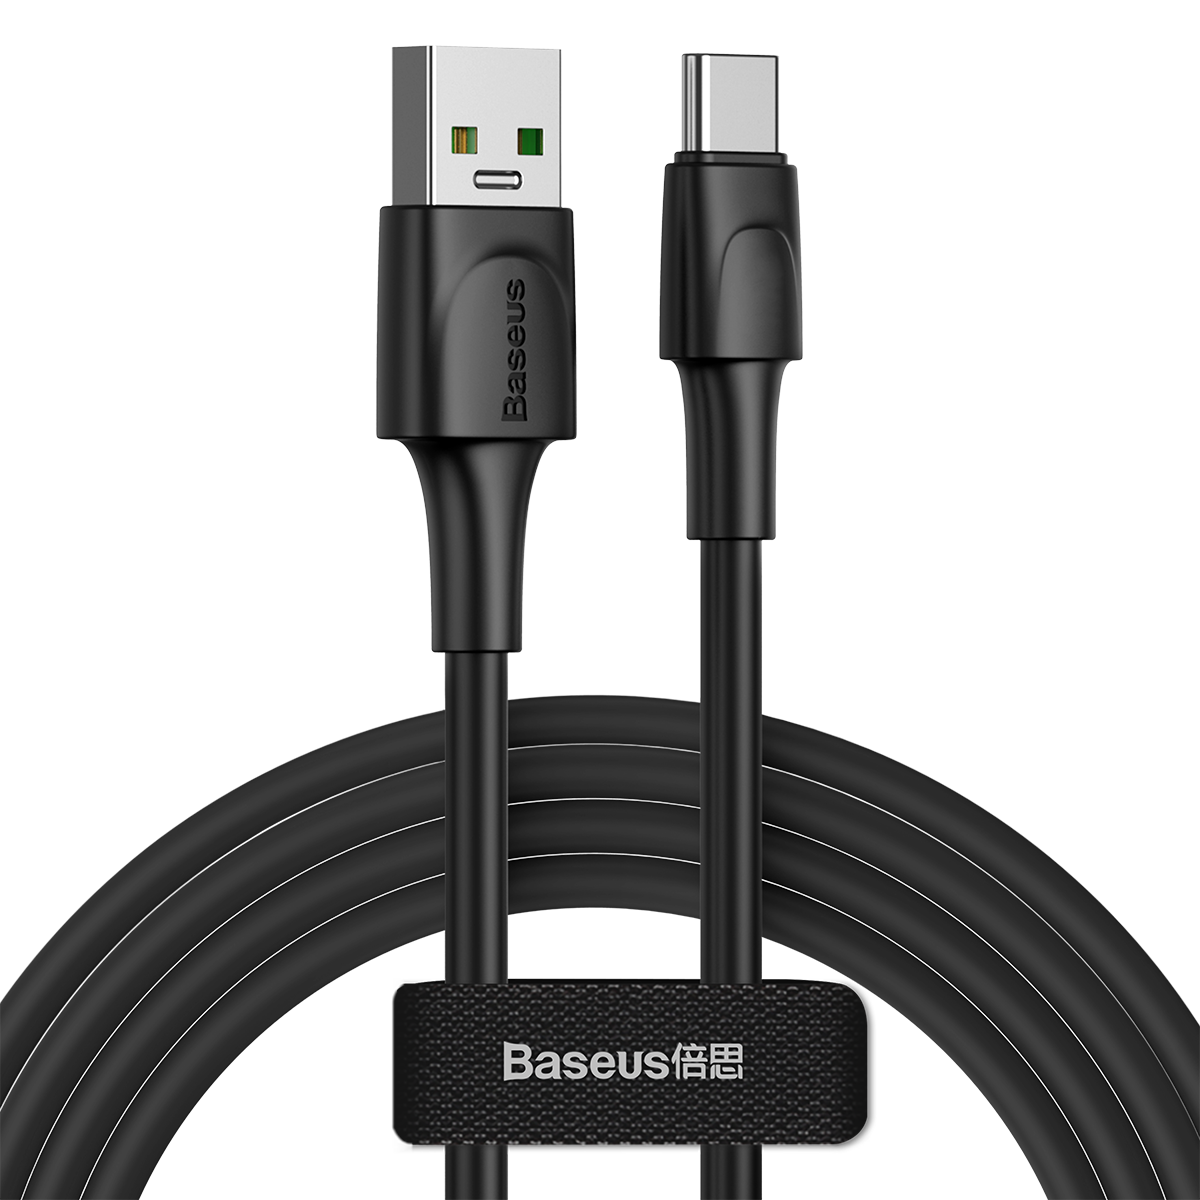 

Baseus 5A Warp OPPO VOOC Certified USB Type-C Cable Fast Charging Data Sync Cord Line Support AFC/QC/FCP Protocols 2m/6.